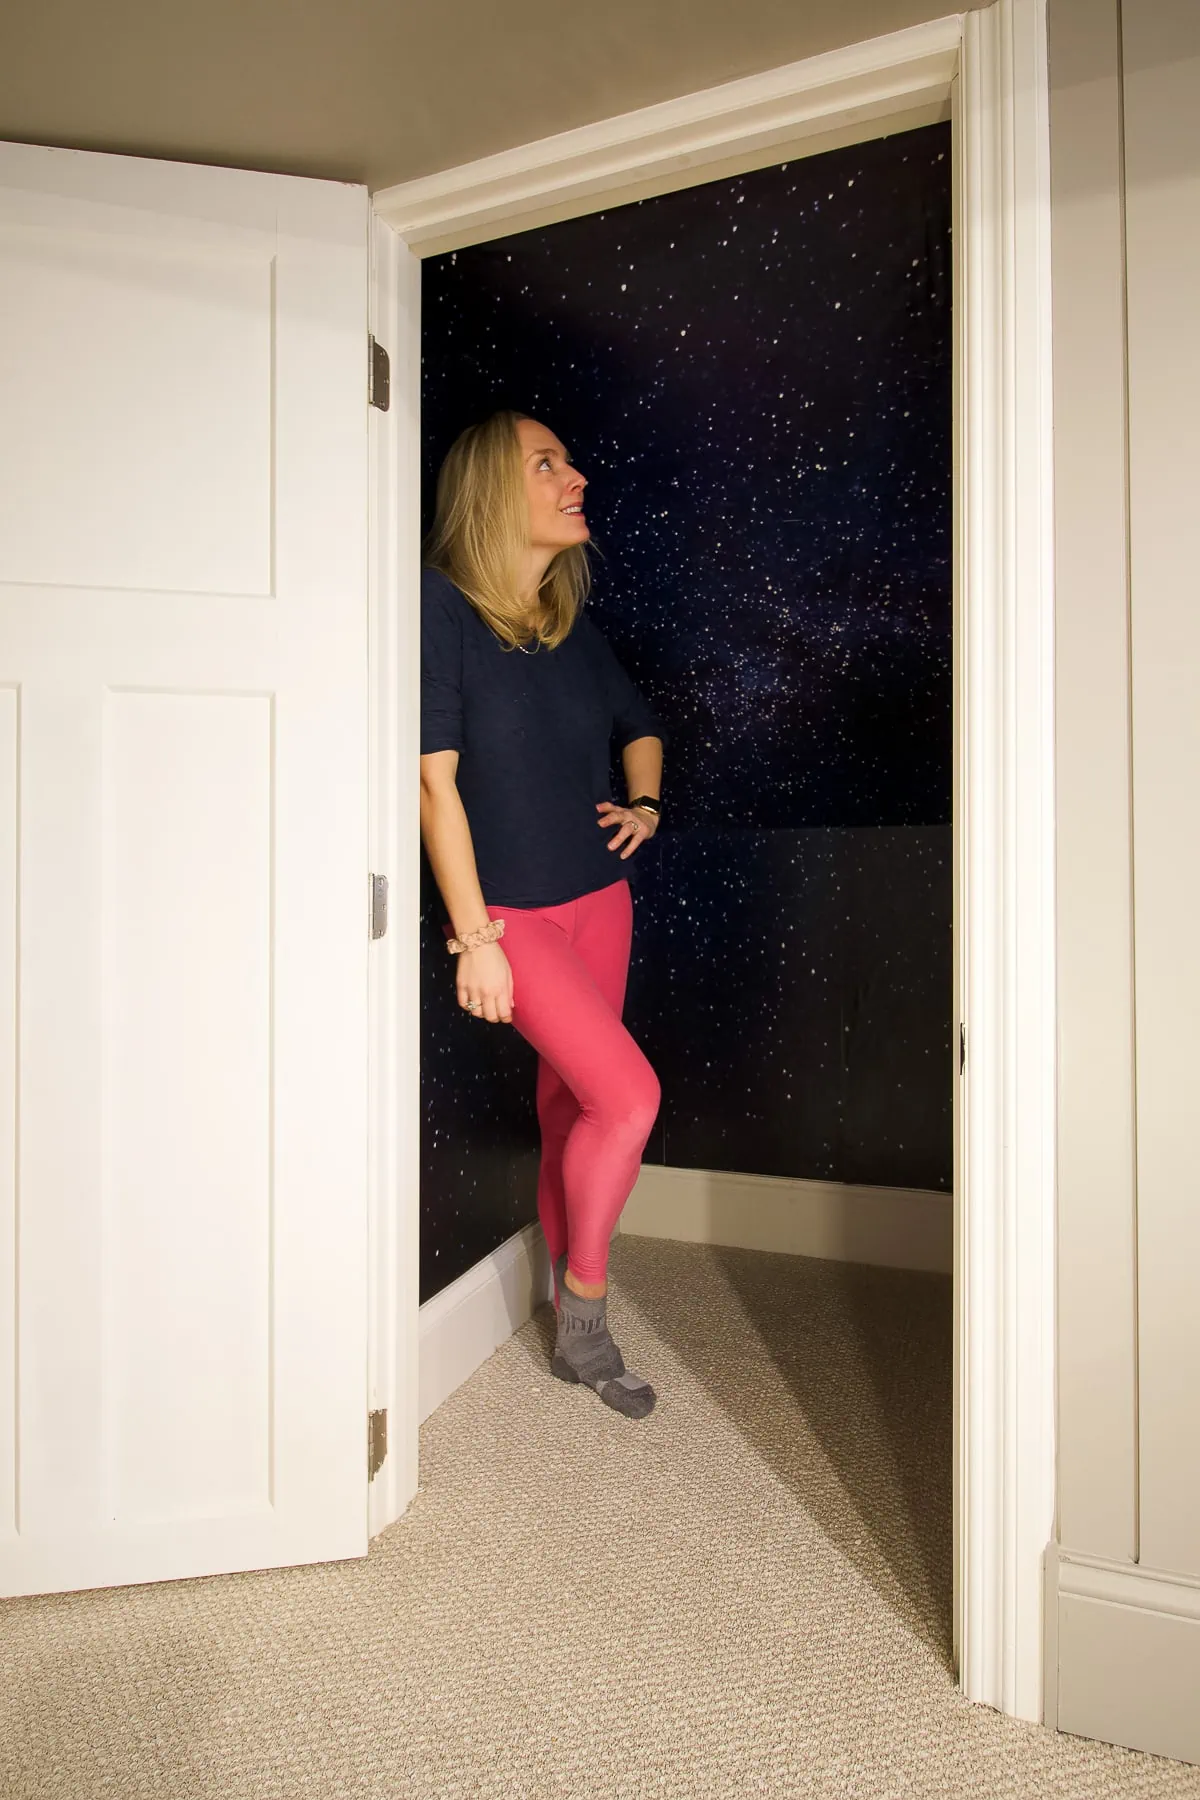 Why I chose paste the wall wallpaper for our space closet in the basement